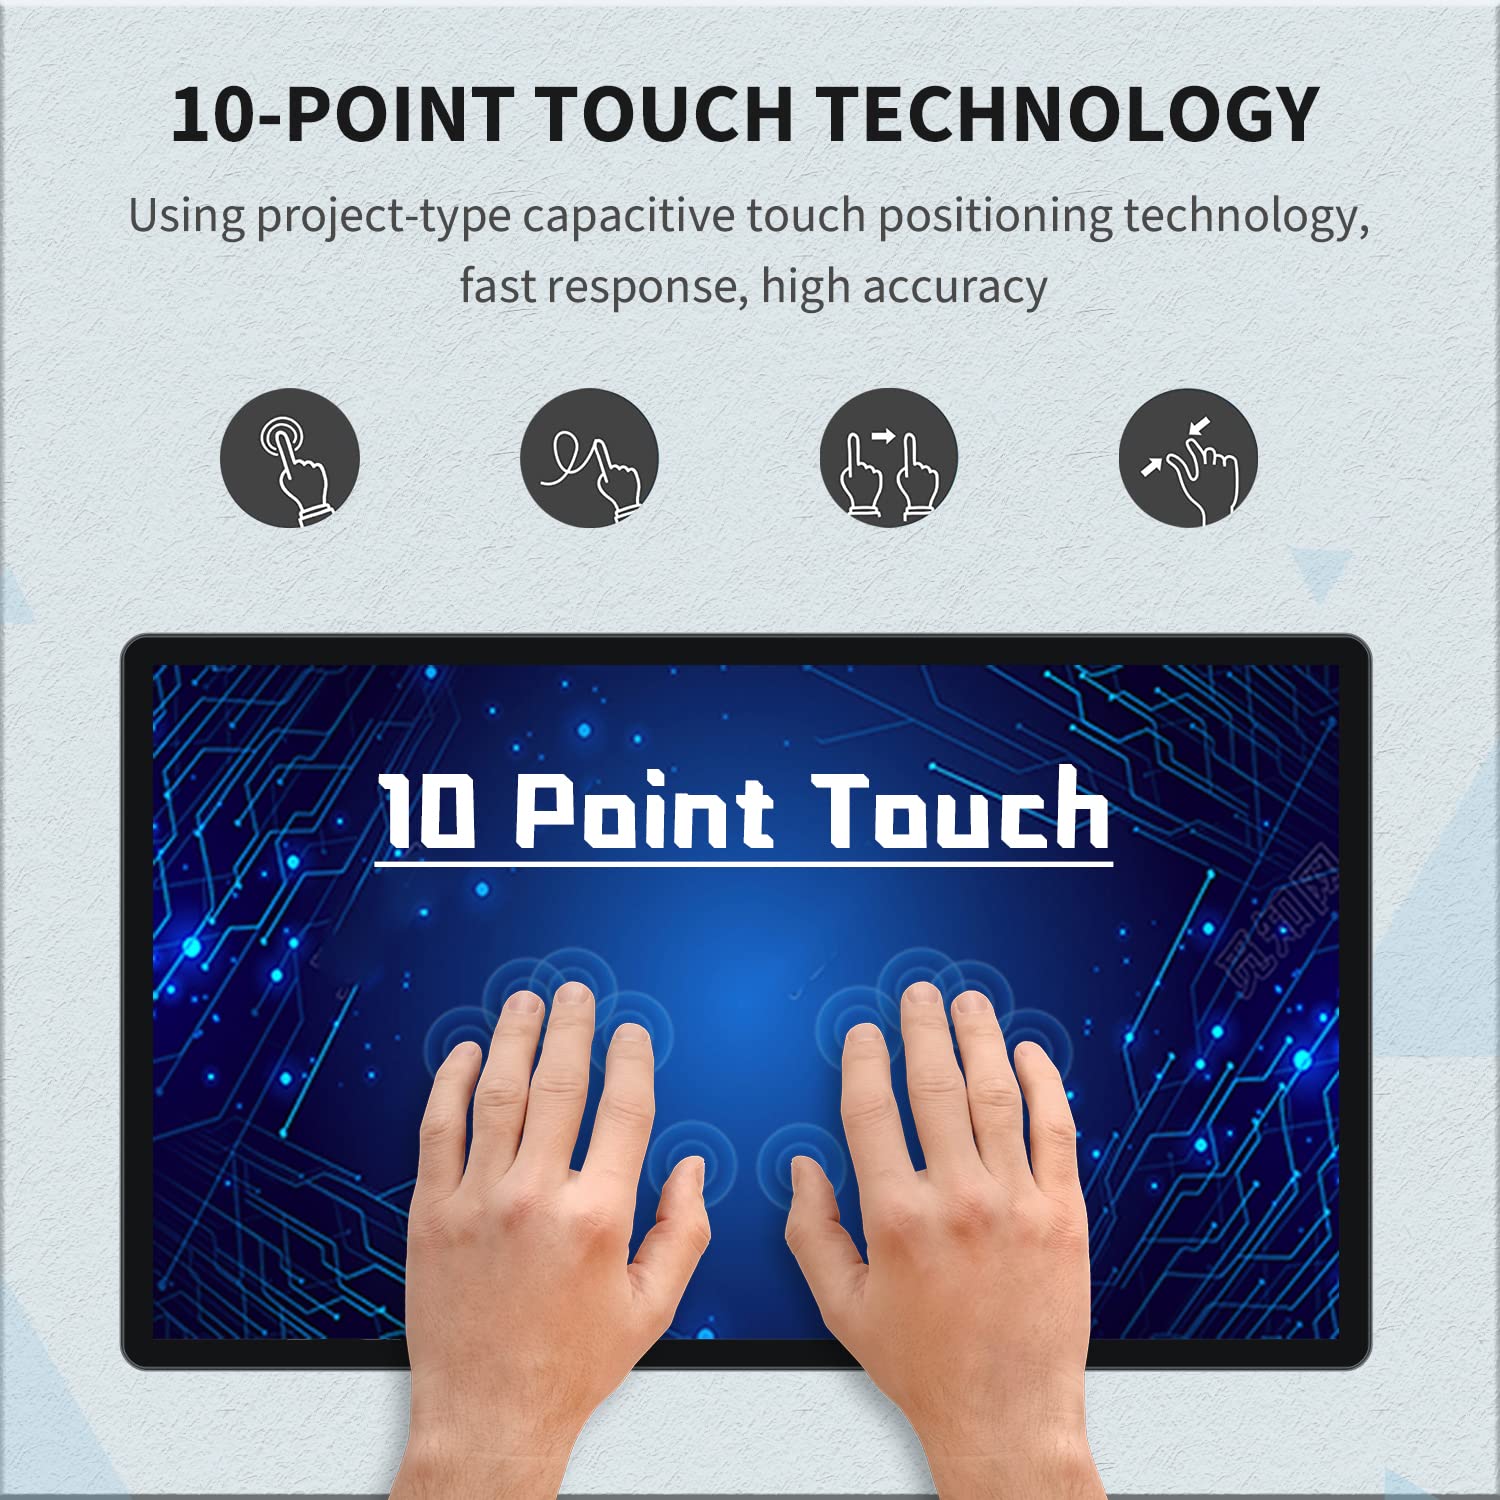 TouchWo 21.5 inch Android 11.0 Touchscreen Industrial PC, 16:9 FHD 1080P, WiFi and Built-in Speakers, RK3568 2GB RAM & 16GB ROM, Smart Board for Classroom, Meeting & Game